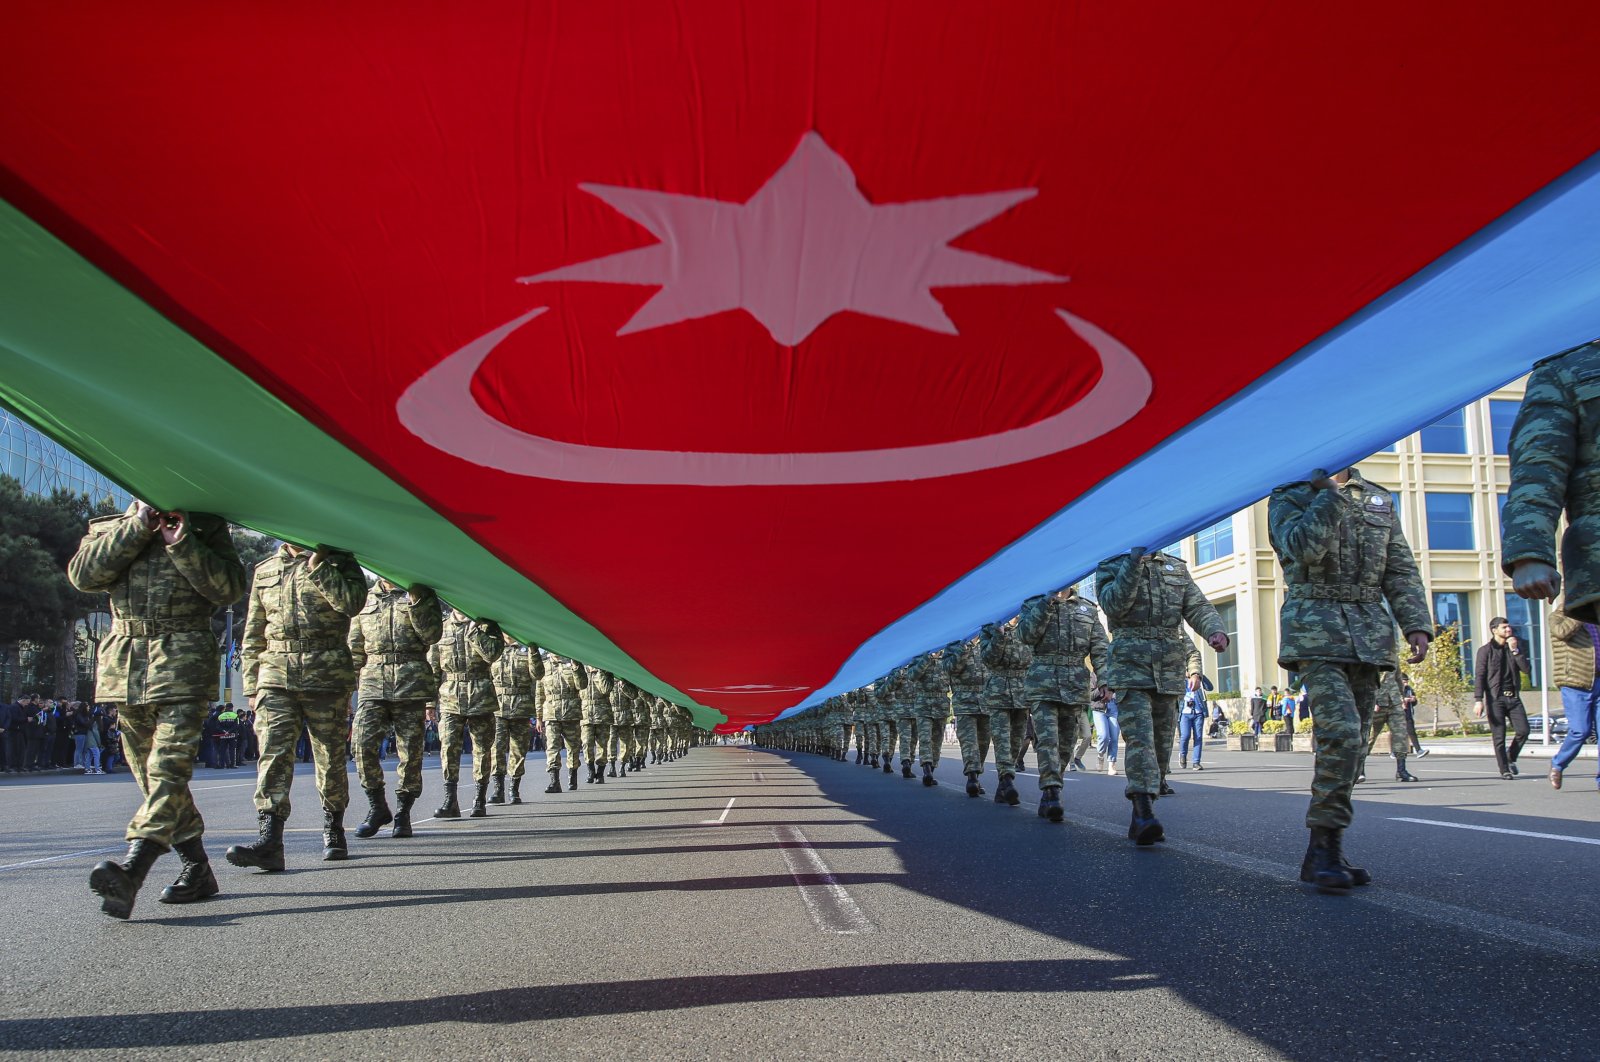 Azerbaijani soldiers carry a large-scale national flag on the anniversary of the end of the 2020 war over the Nagorno-Karabakh region between Azerbaijan and Armenia, in downtown Baku, Azerbaijan, Nov. 8, 2021. (EPA Photo)